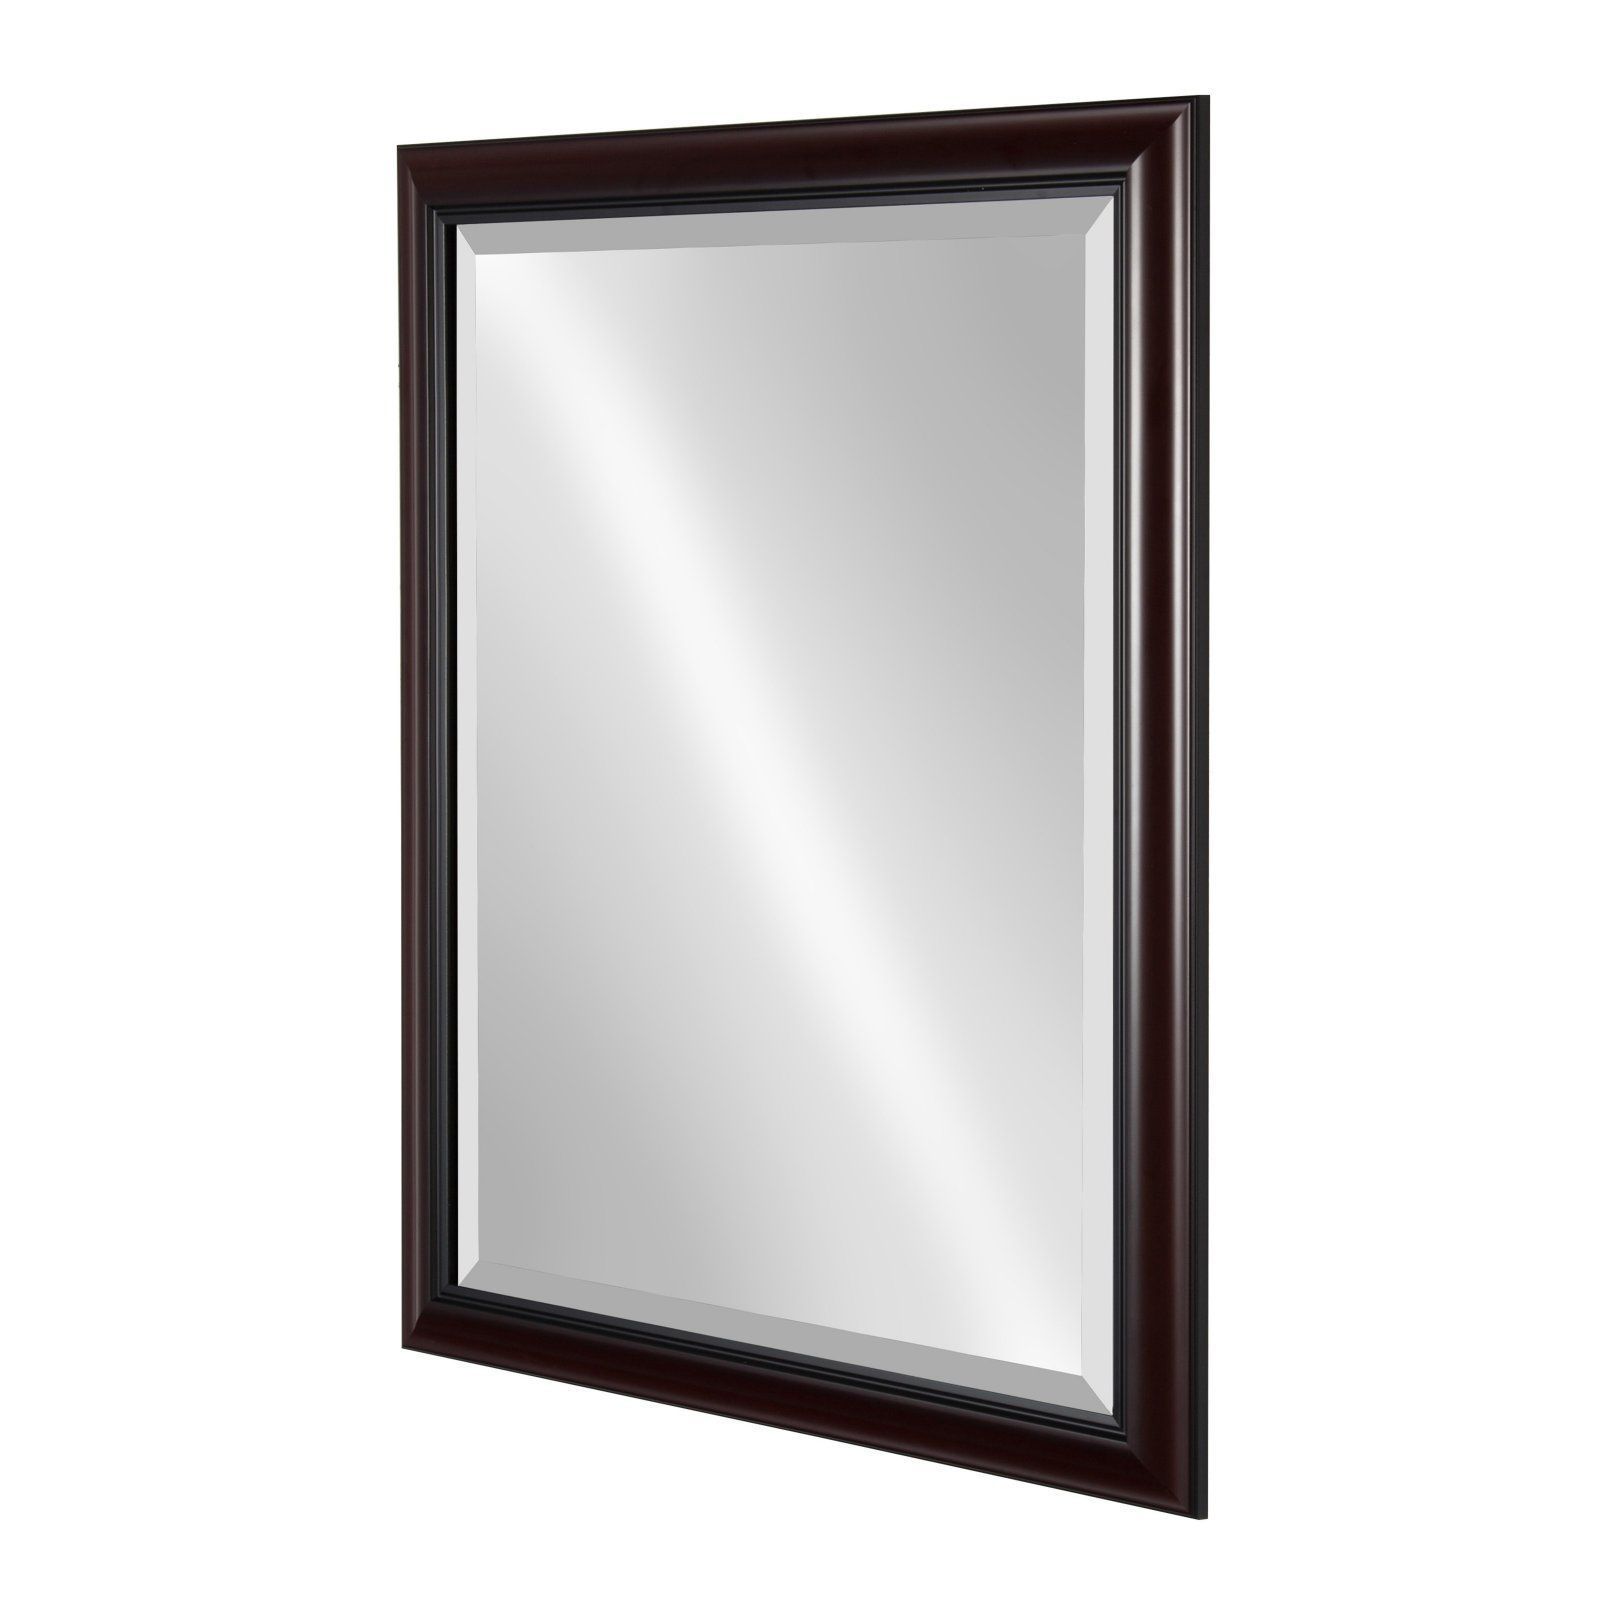 Most Recent Kate And Laurel Dalat Framed Beveled Wall Mirror Cherry, #beveled # Intended For Cut Corner Frameless Beveled Wall Mirrors (View 15 of 15)